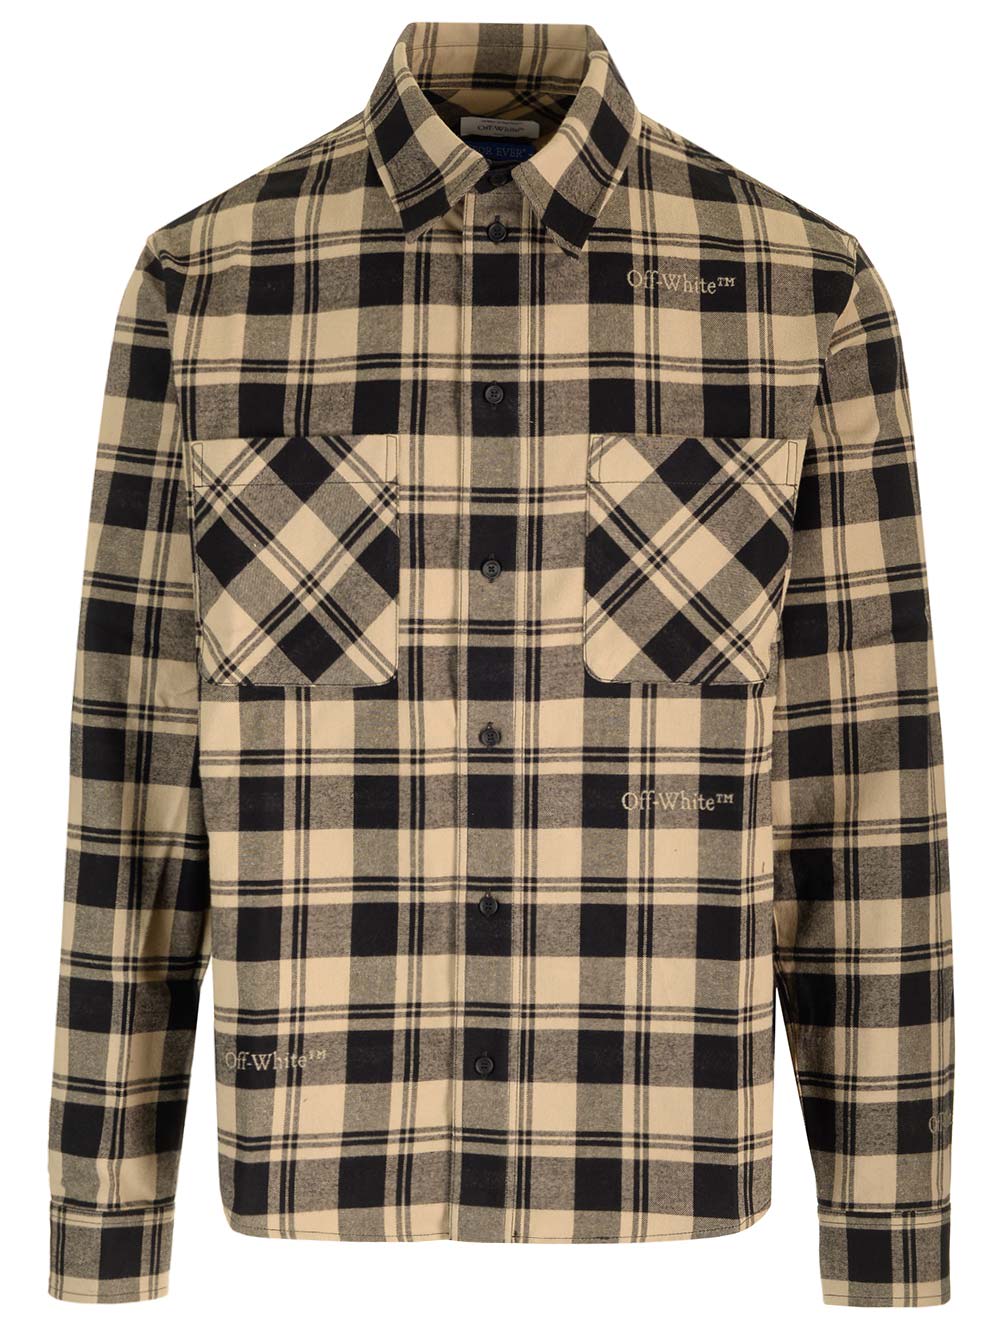 OFF-WHITE CHECKED FLANNEL SHIRT